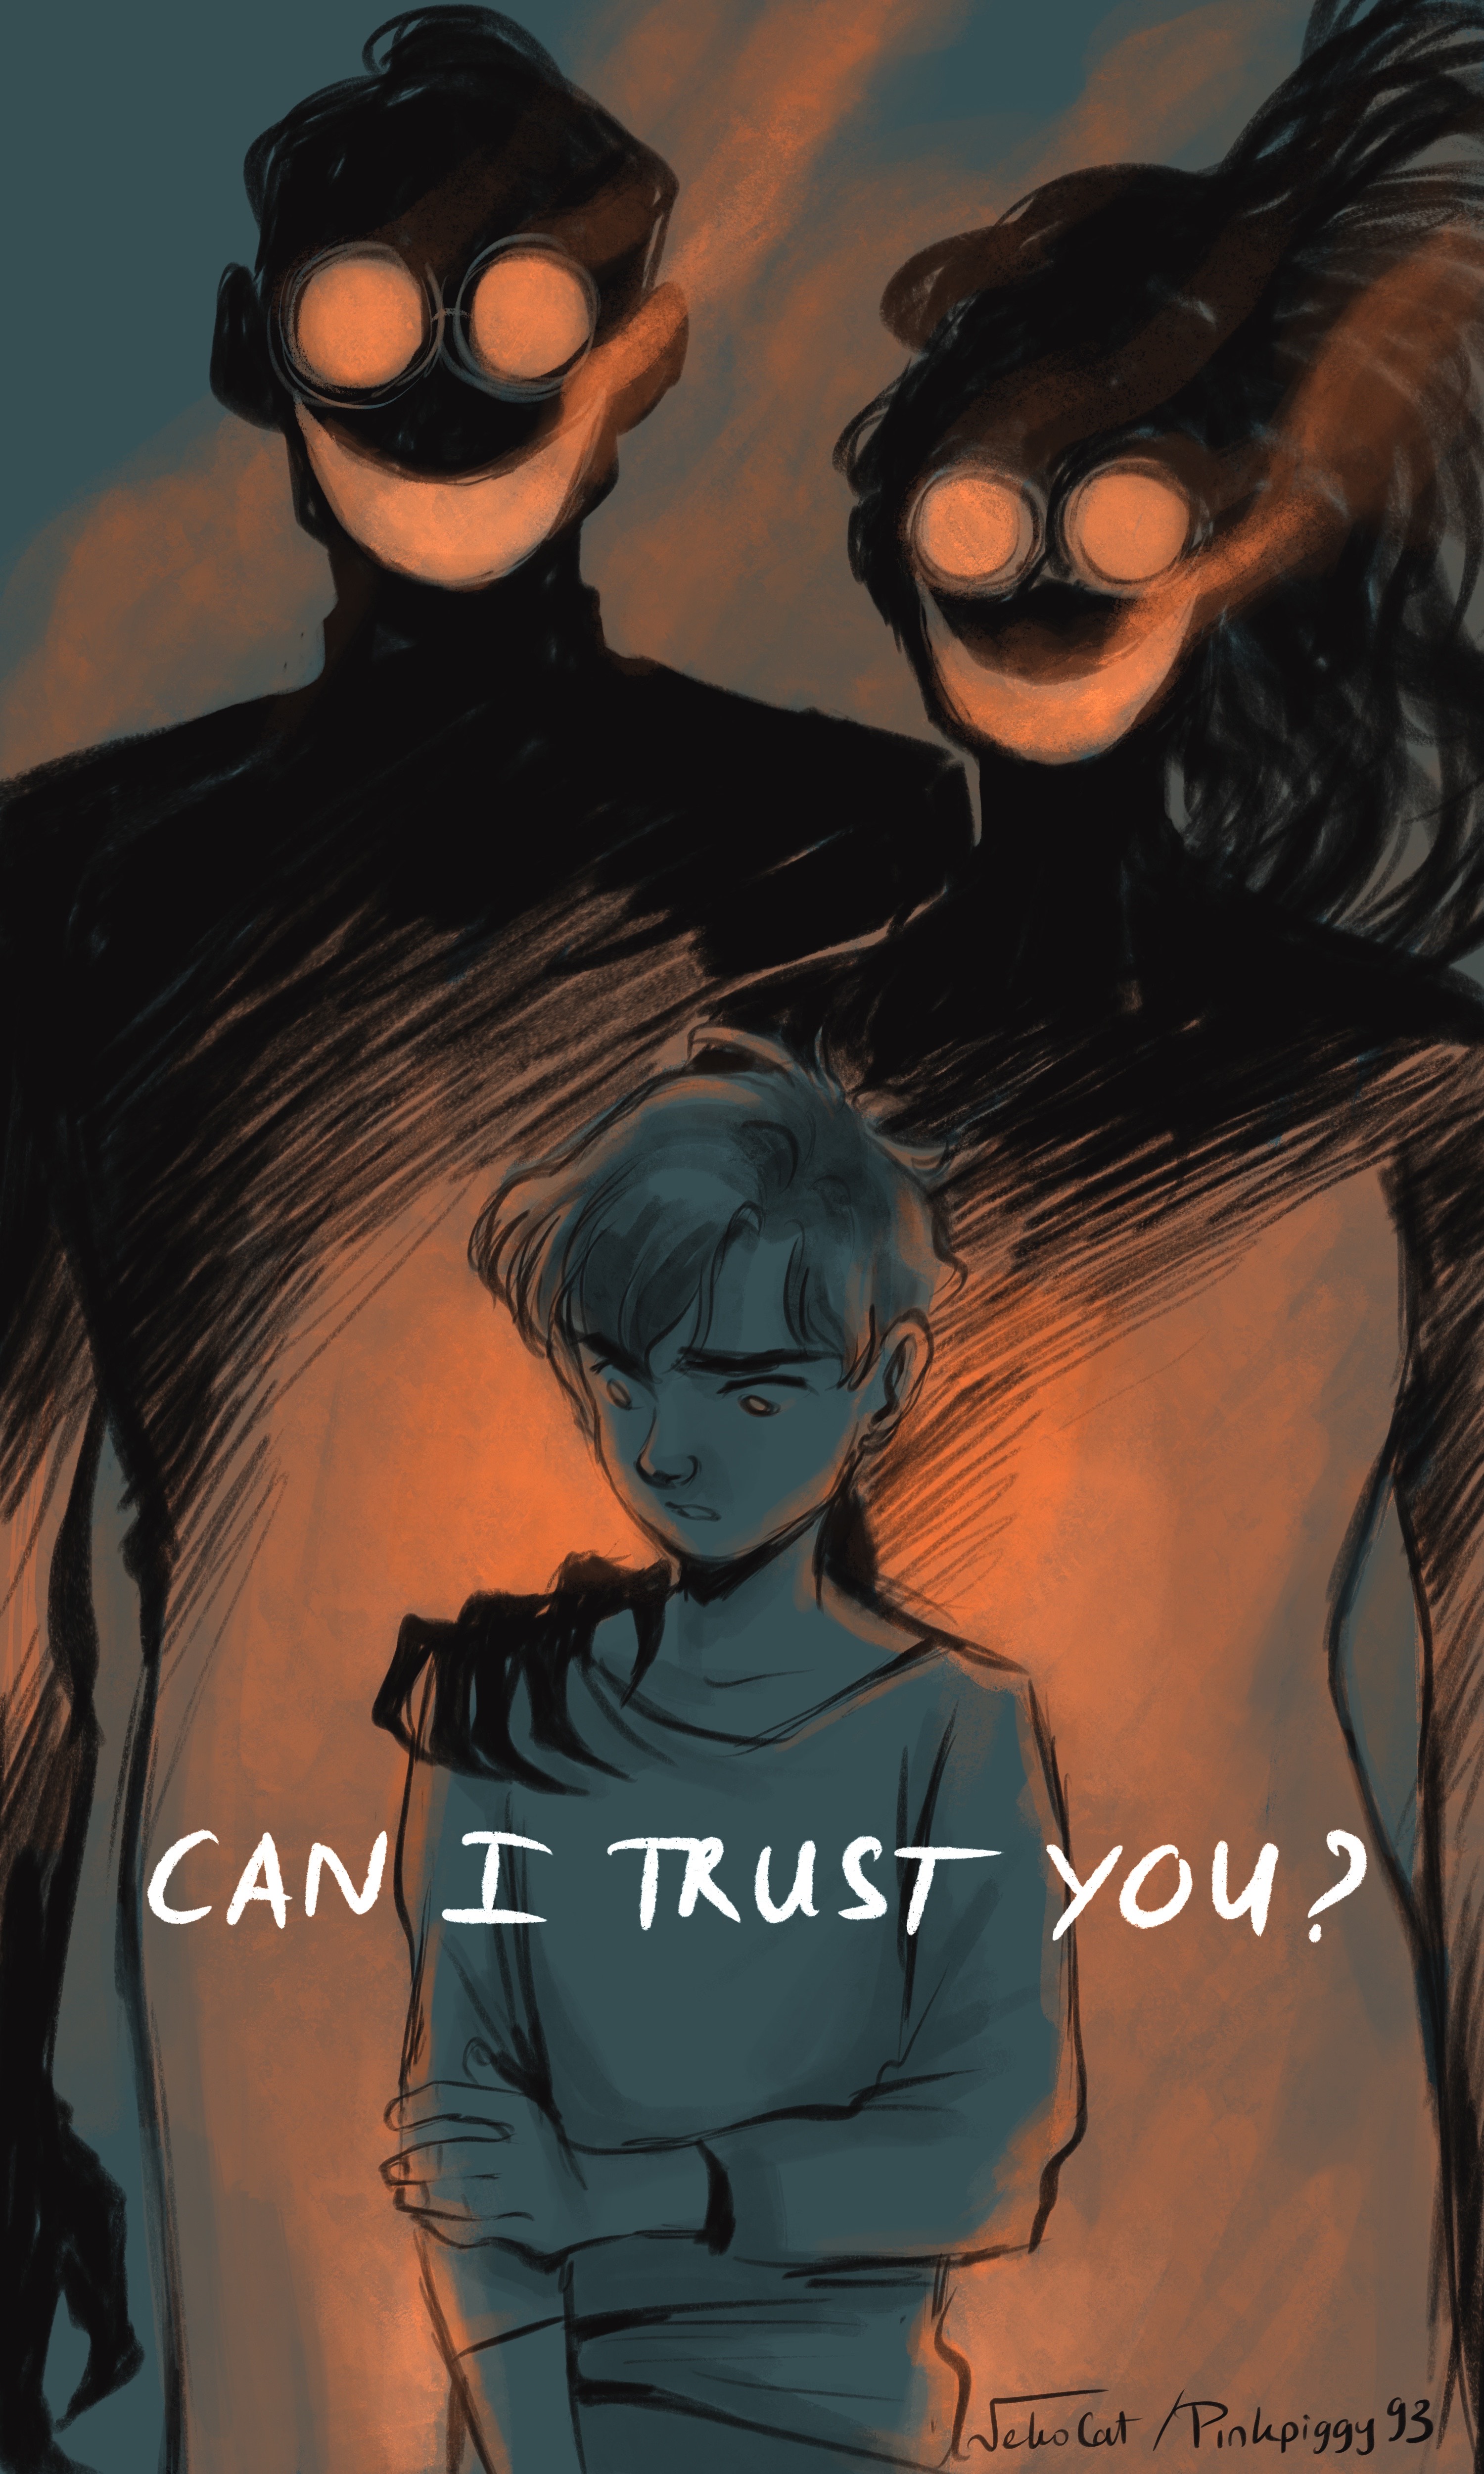 Two creepy smokey shadows loom over a child. White text reads "Can I trust you?"